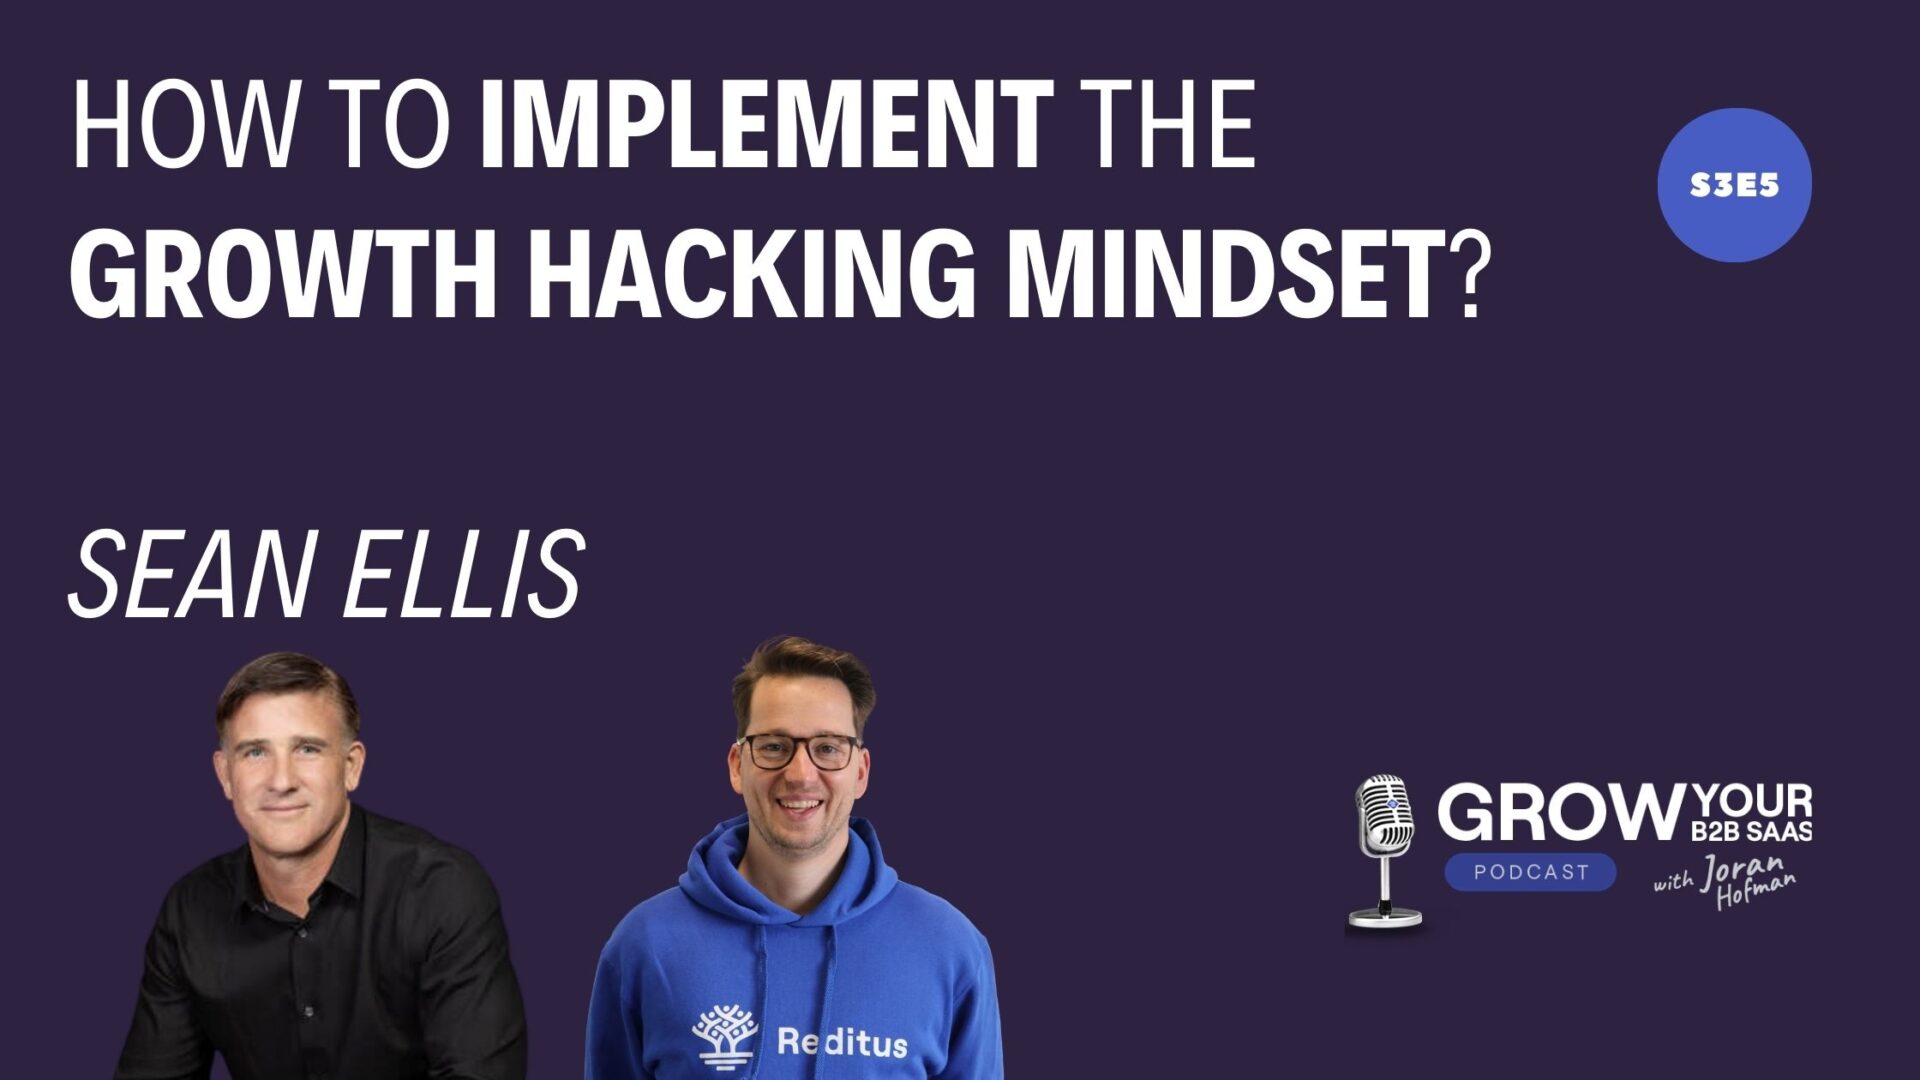 S3E5 – How to implement the Growth Hacking mindset in your B2B SaaS? With Sean Ellis